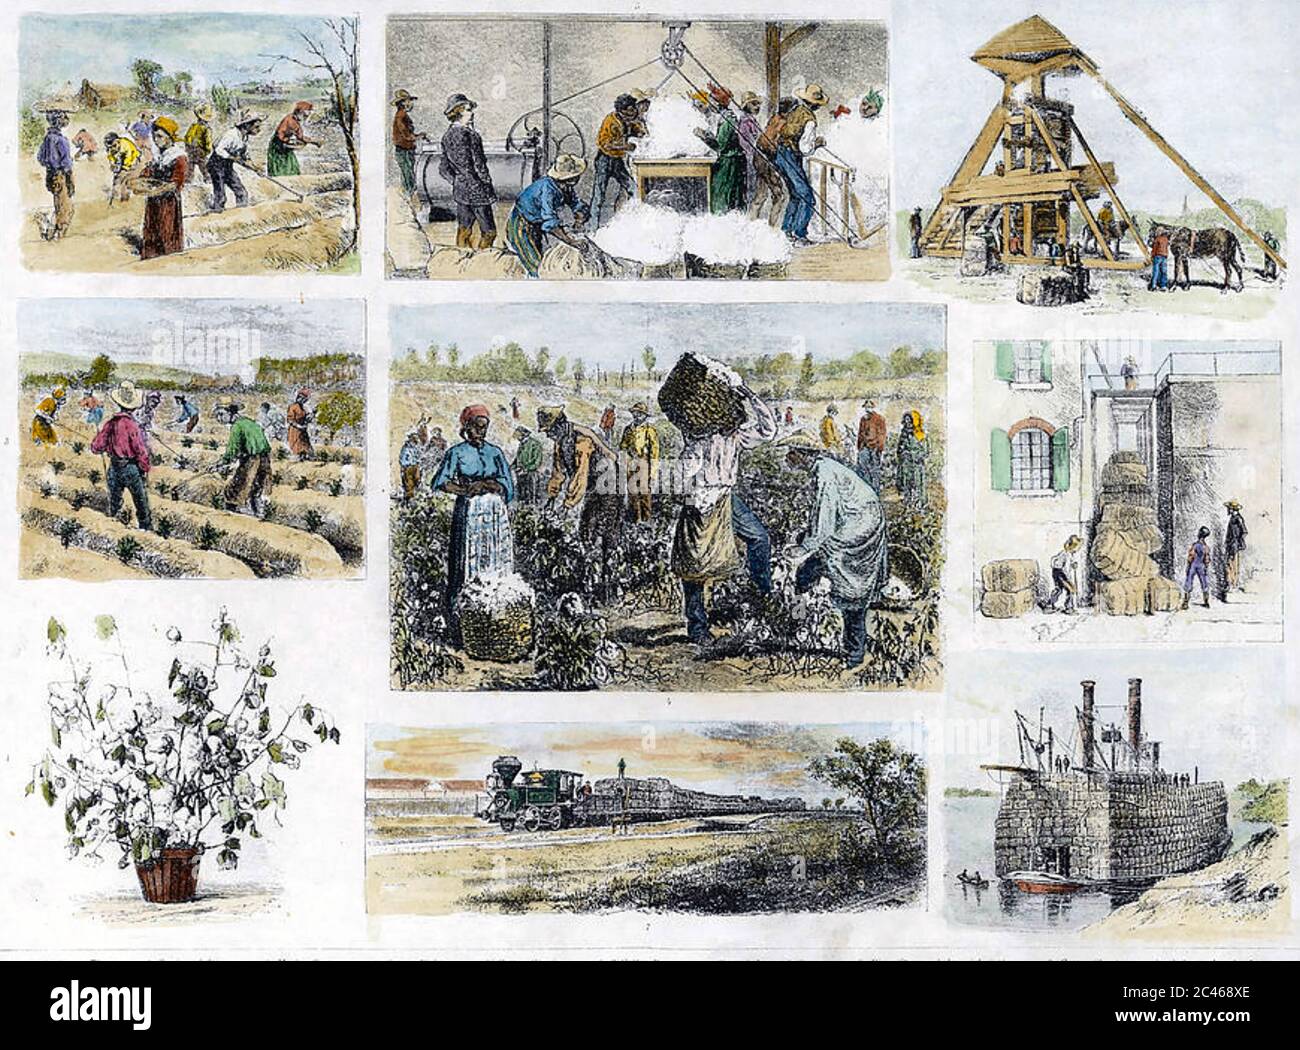 COTTON PRODUCTION IN AMERICA in the 1850s Stock Photo